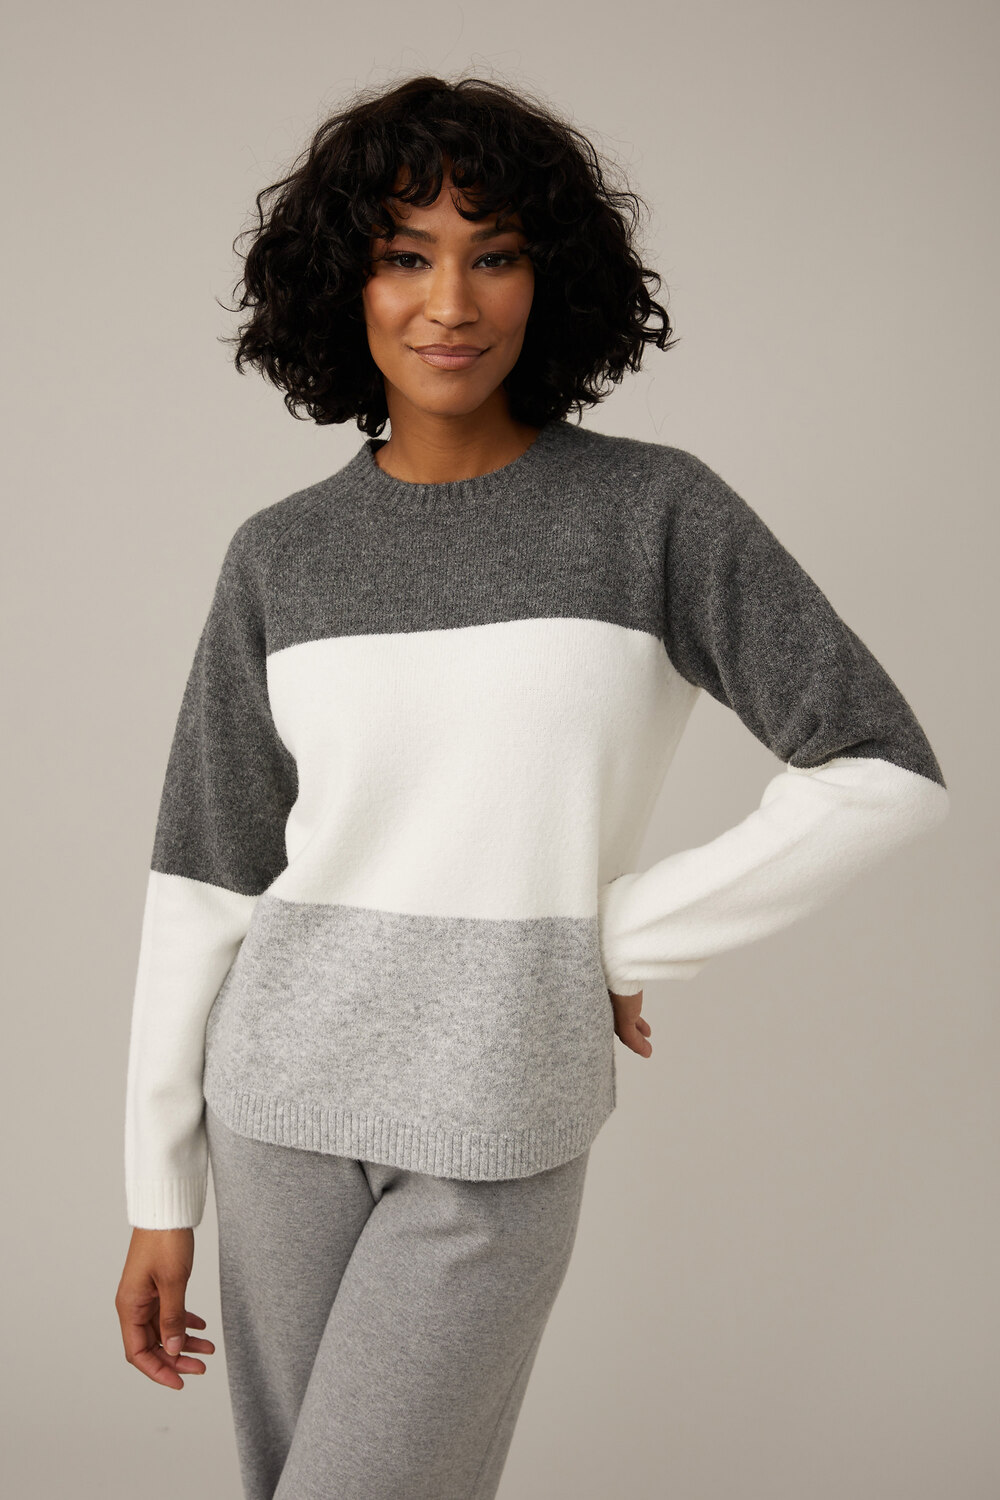 Emproved Pull tricolore modèle A2244. Combo Gris